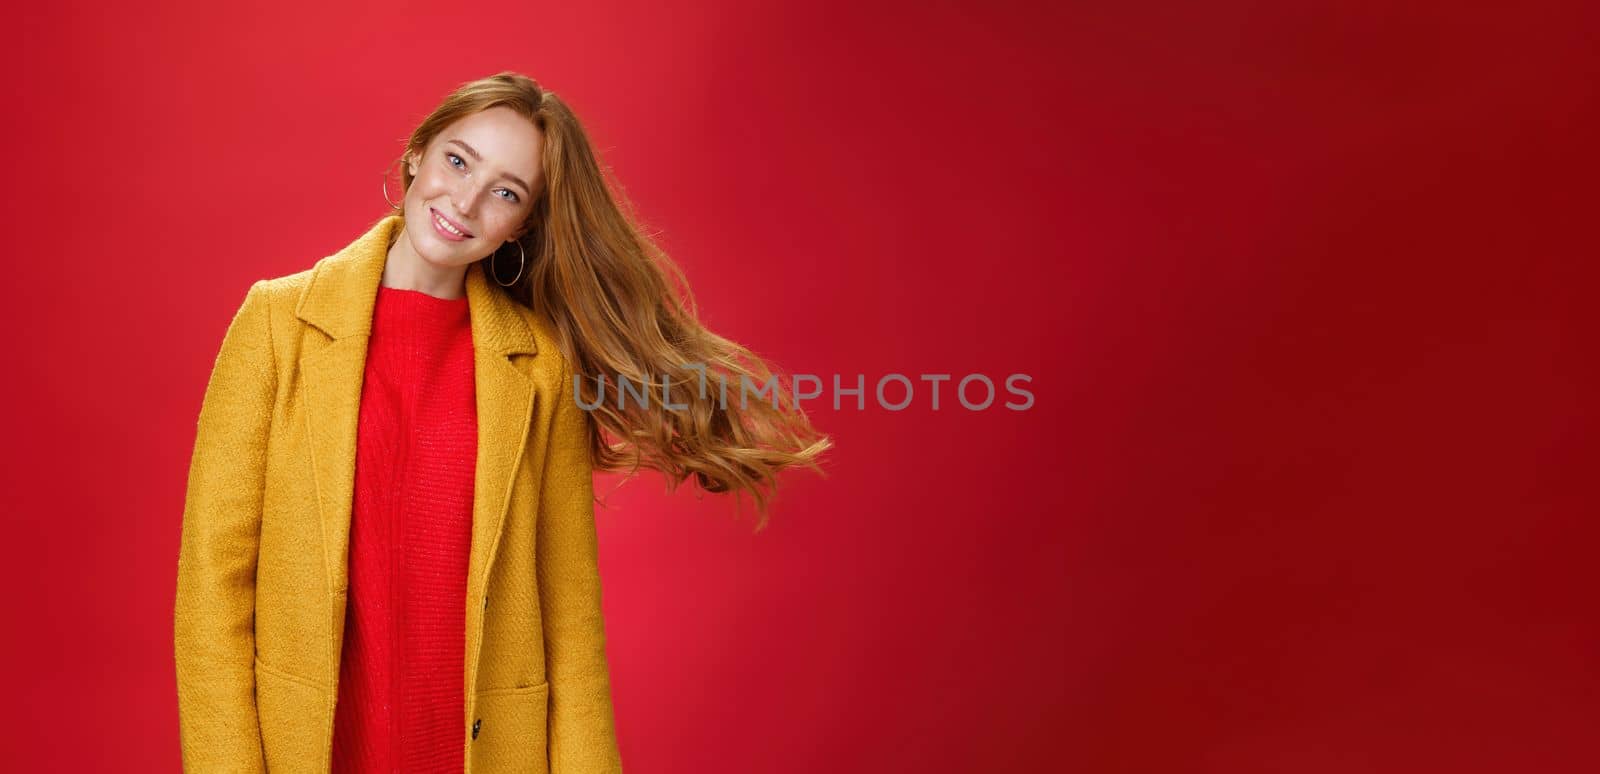 Charming redhead female with freckles waving hair. smiling broadly tilting head as haircut flying in air posing delighted and carefree over red background in warm yellow coat and knitted dress.